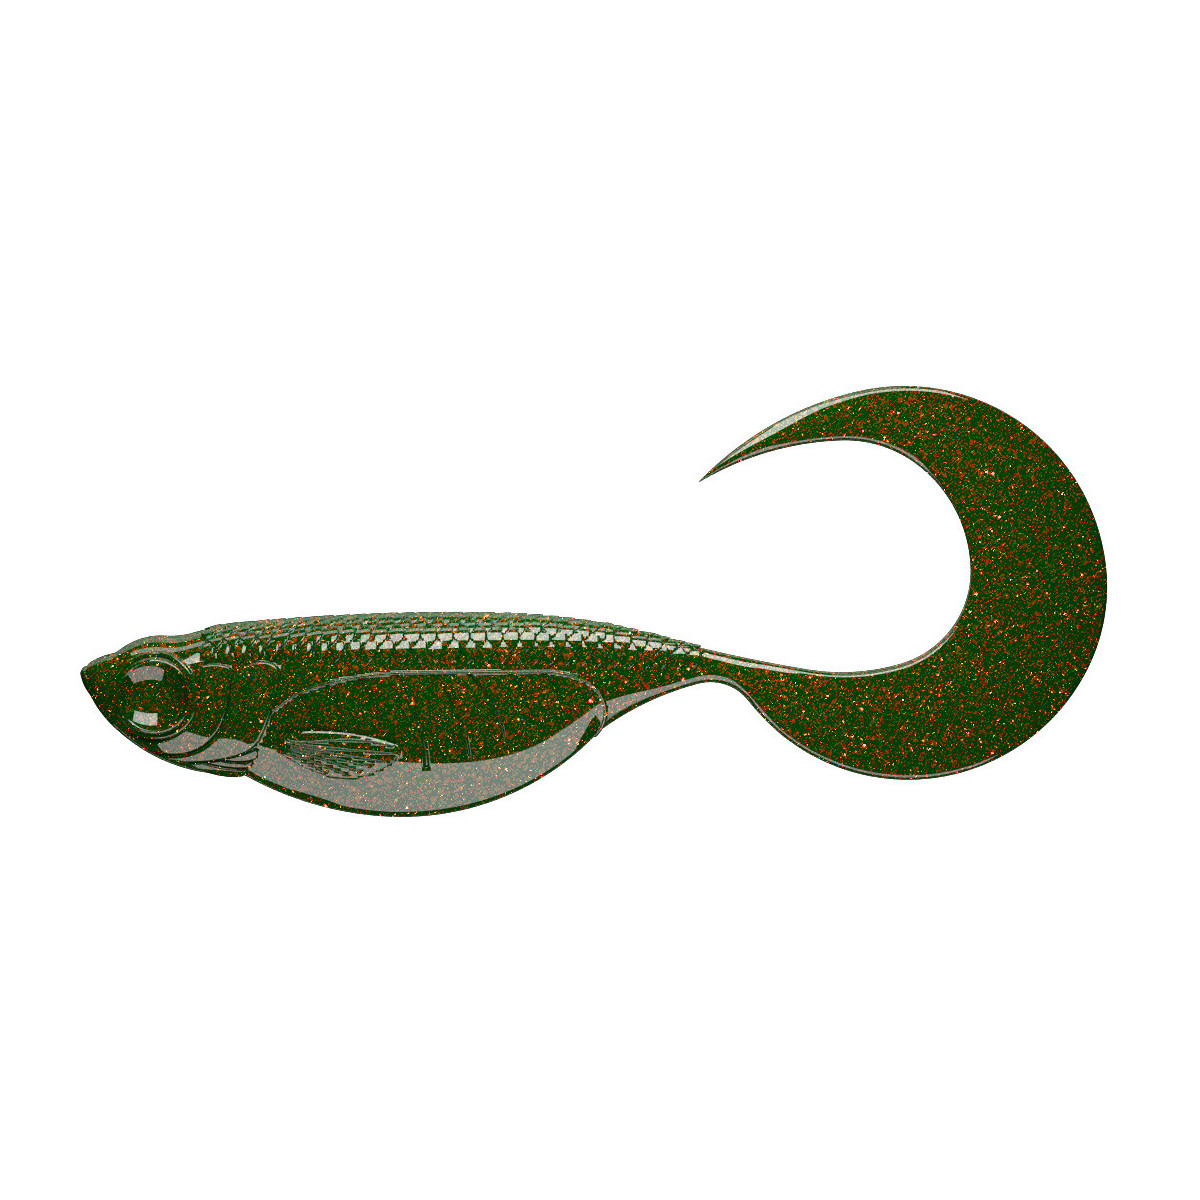 Libra Lures Embrion Twist Tail 2.5'' 6.3cm - 032 / MOTOR OIL GREEN